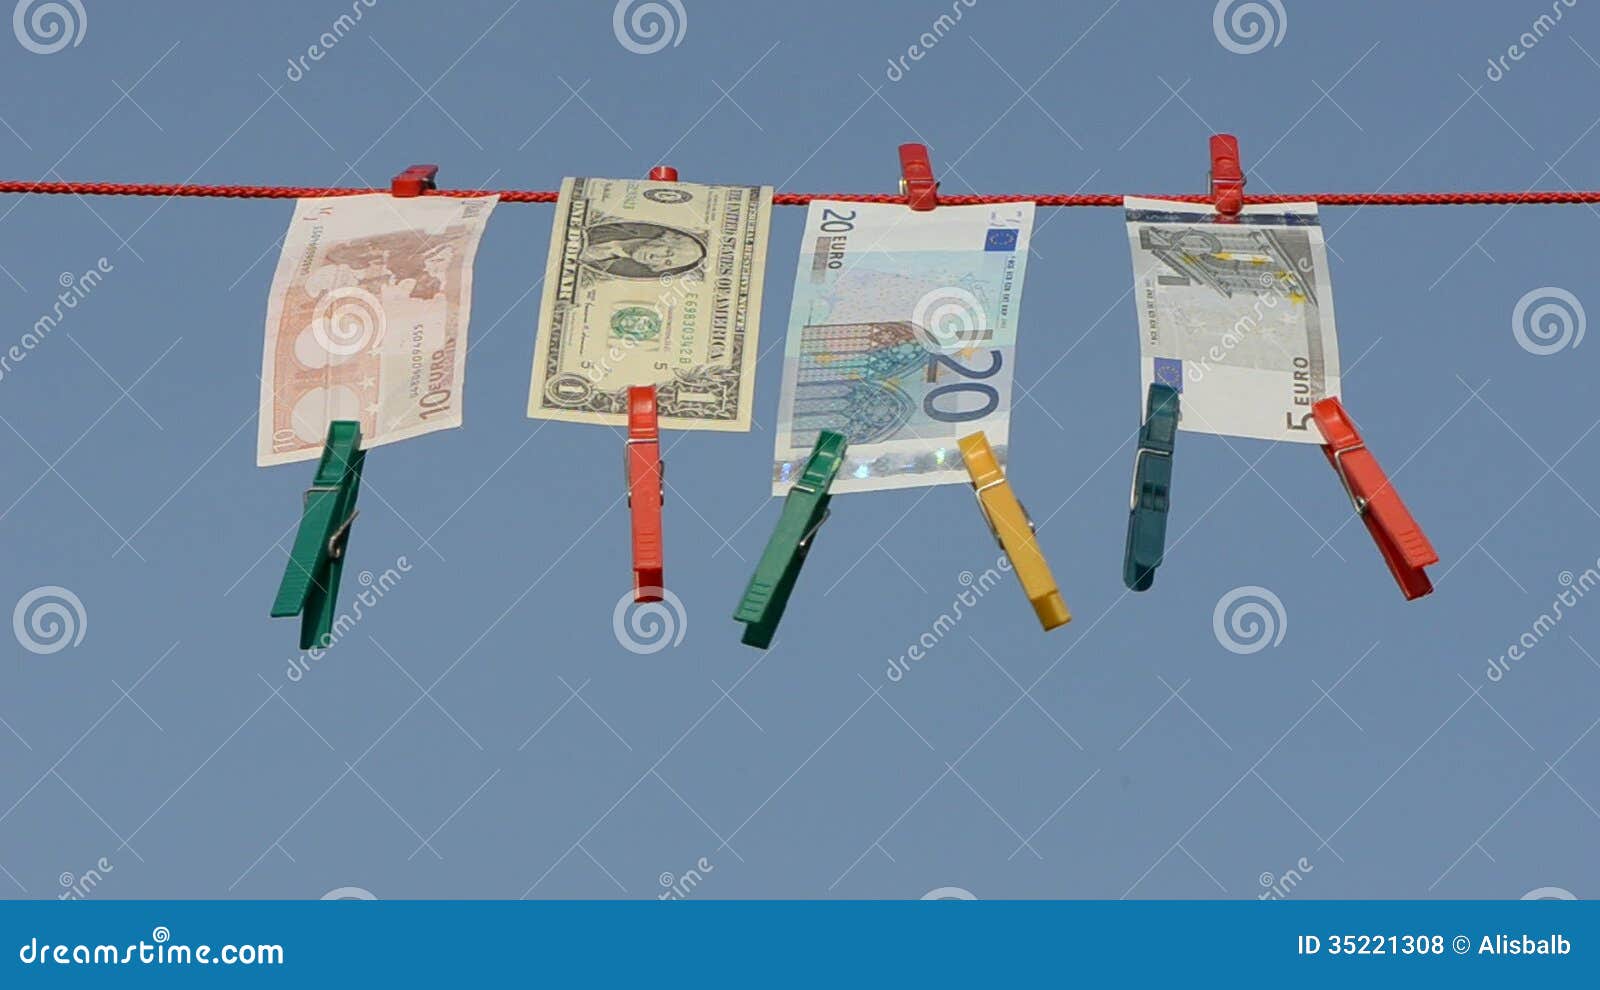 https://thumbs.dreamstime.com/z/currency-banknote-clothes-line-money-laundering-string-35221308.jpg